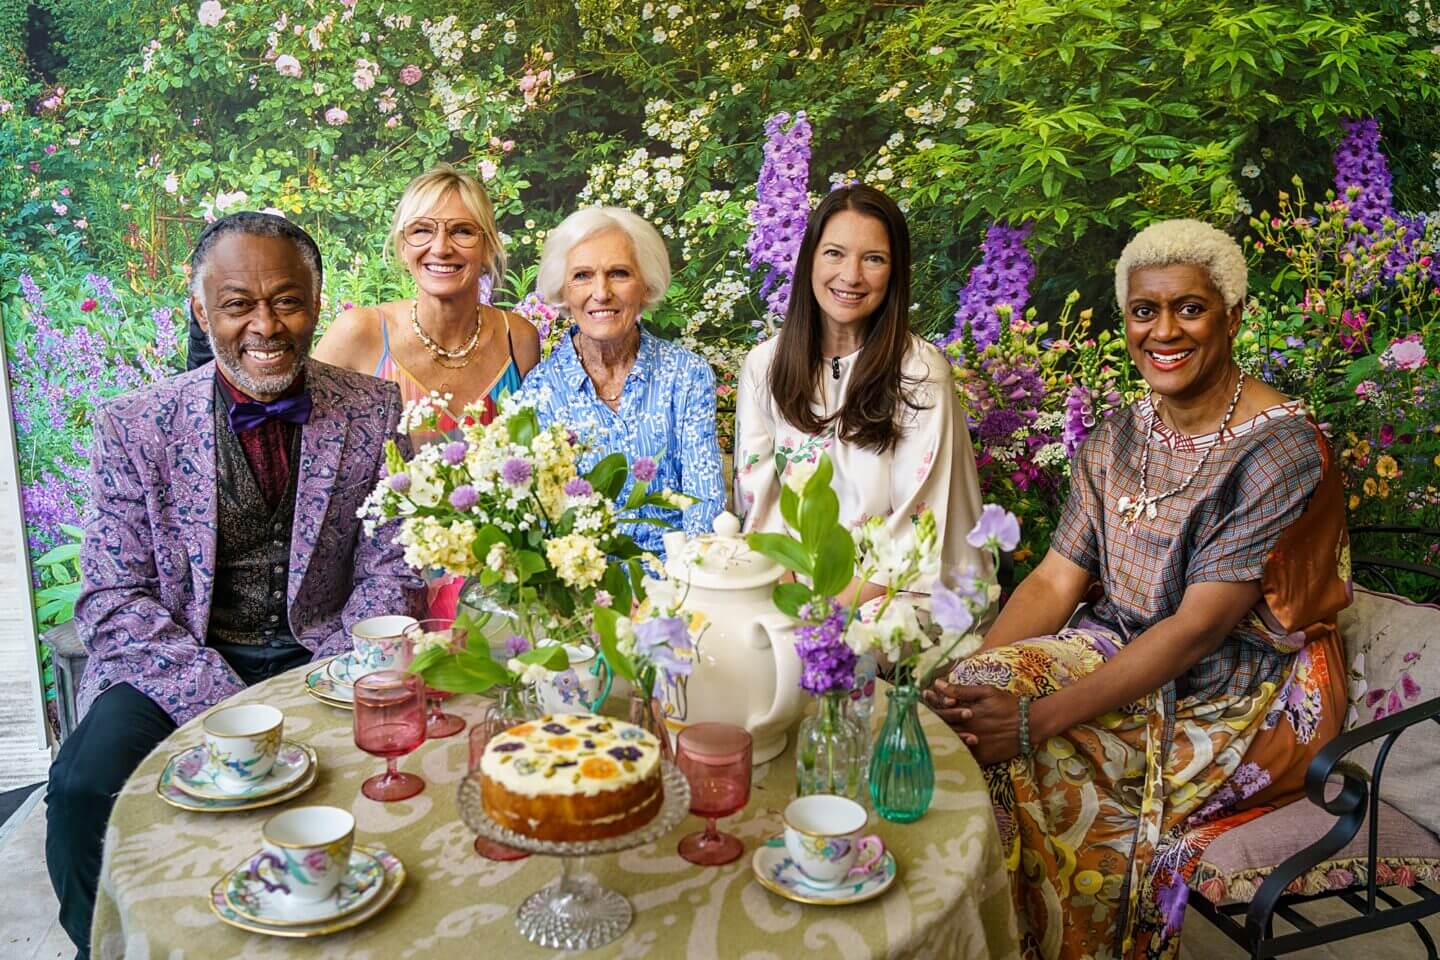 Danny Clarke, Jo Whiley, Mary Berry, Rachel de Thame and Arit Anderson at Chelsea Flower Show for the National Garden Scheme.